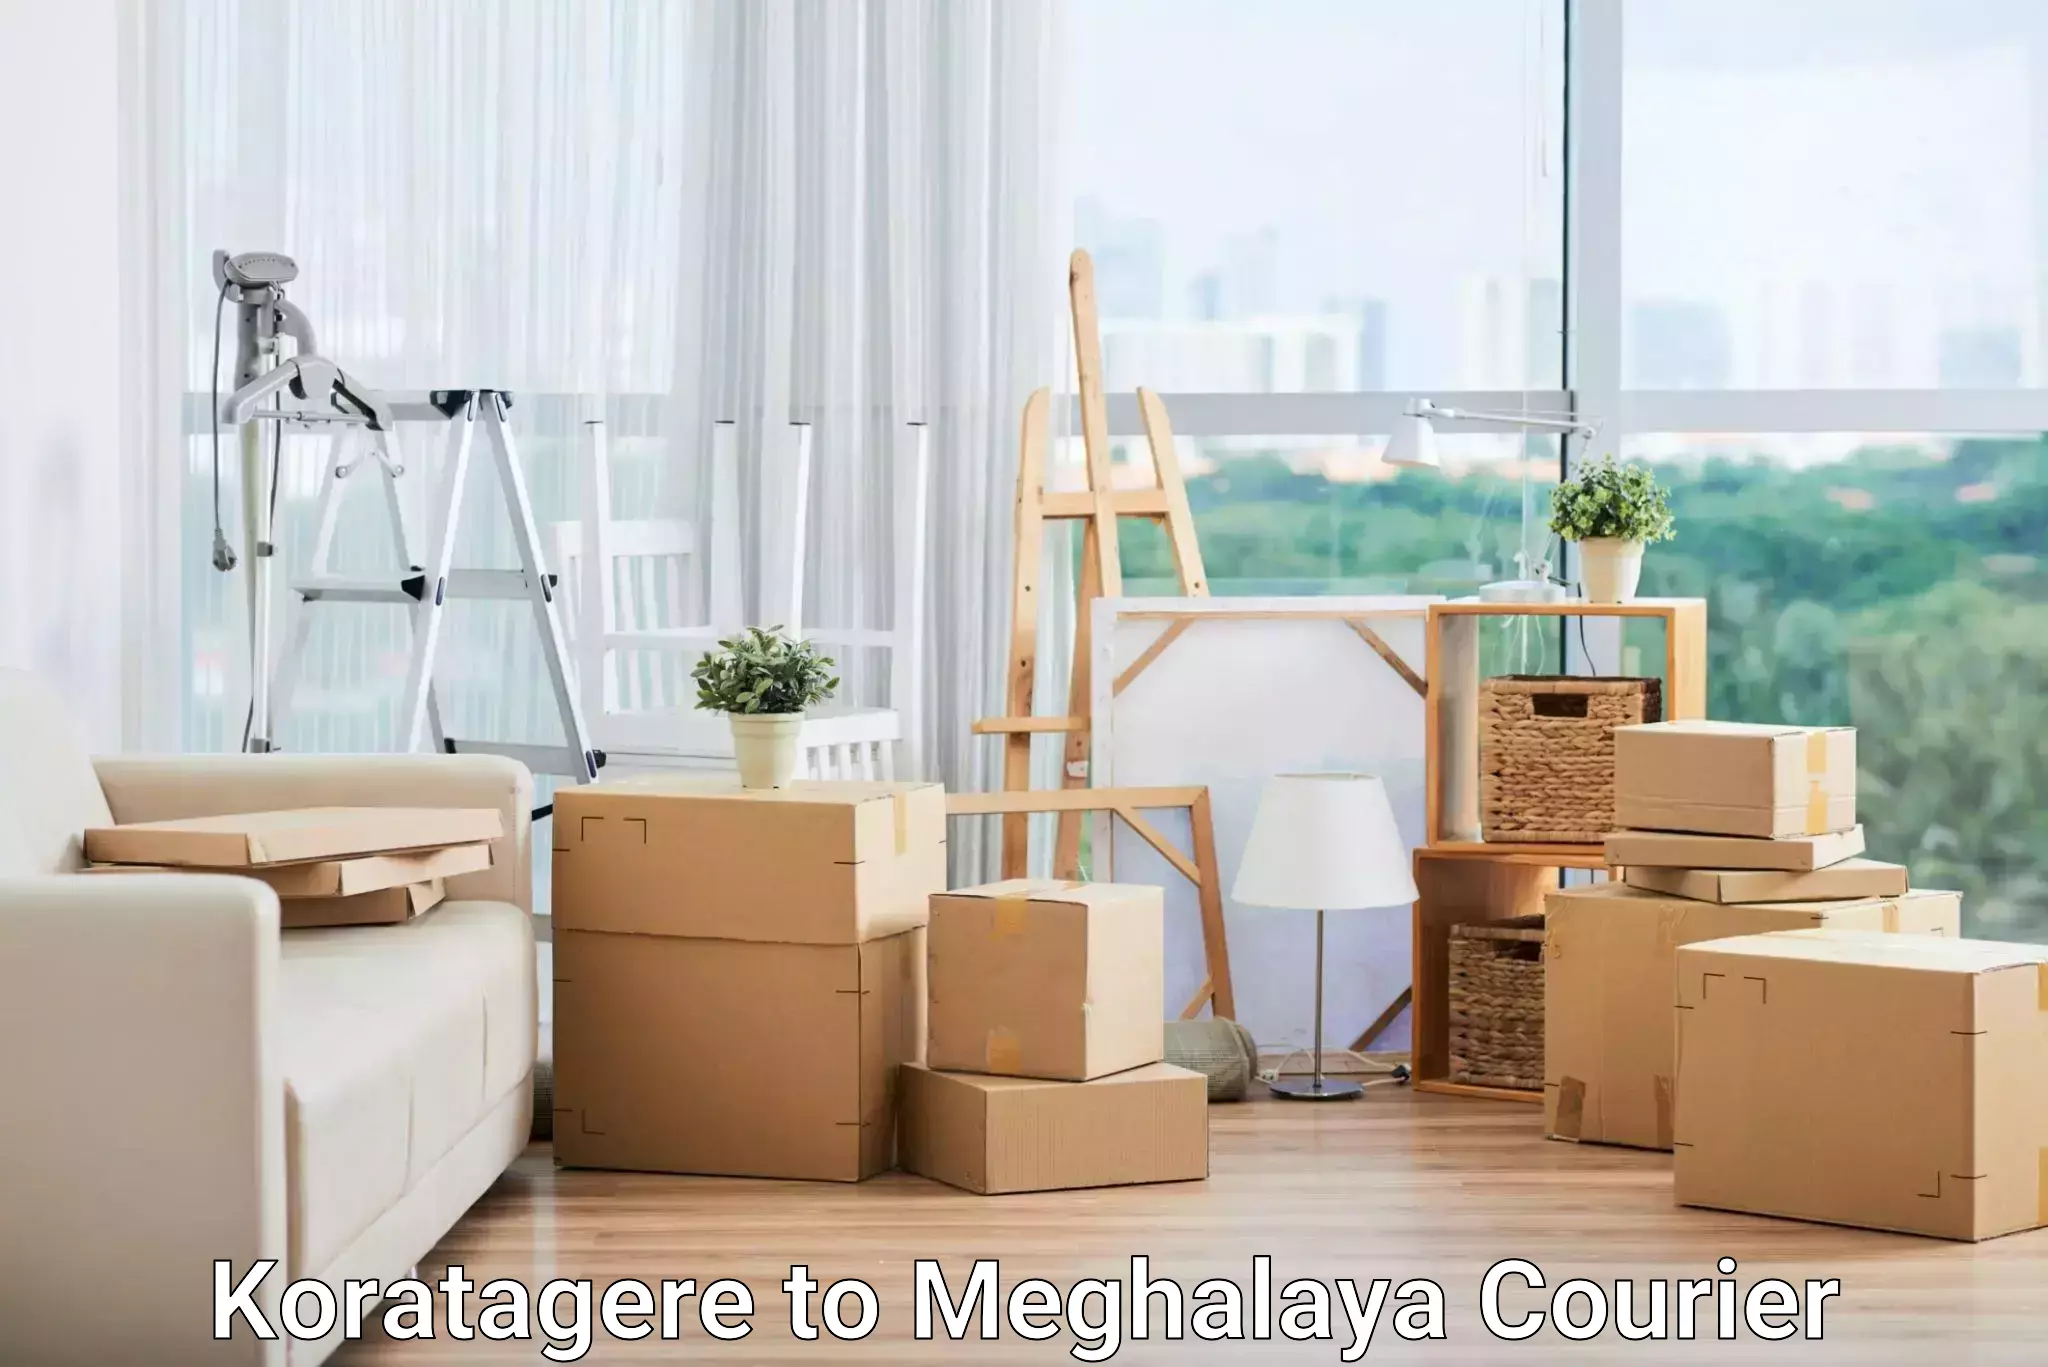 Package delivery network Koratagere to Meghalaya